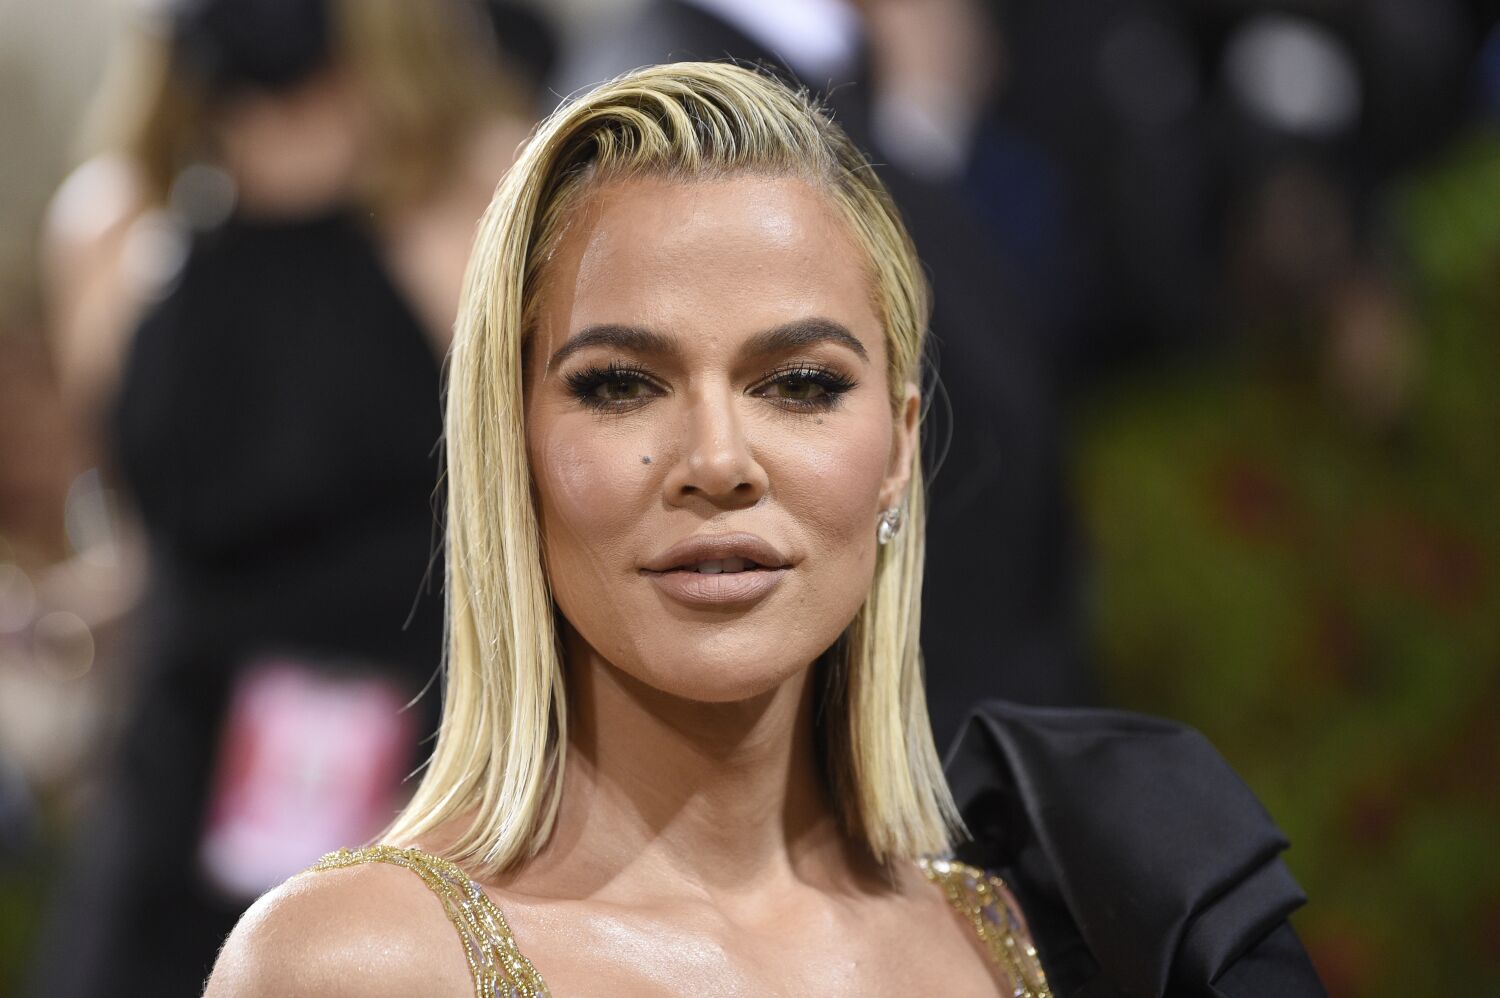 What's on Khloé Kardashian's face? A scar strip, 'Thank you for asking,' she says